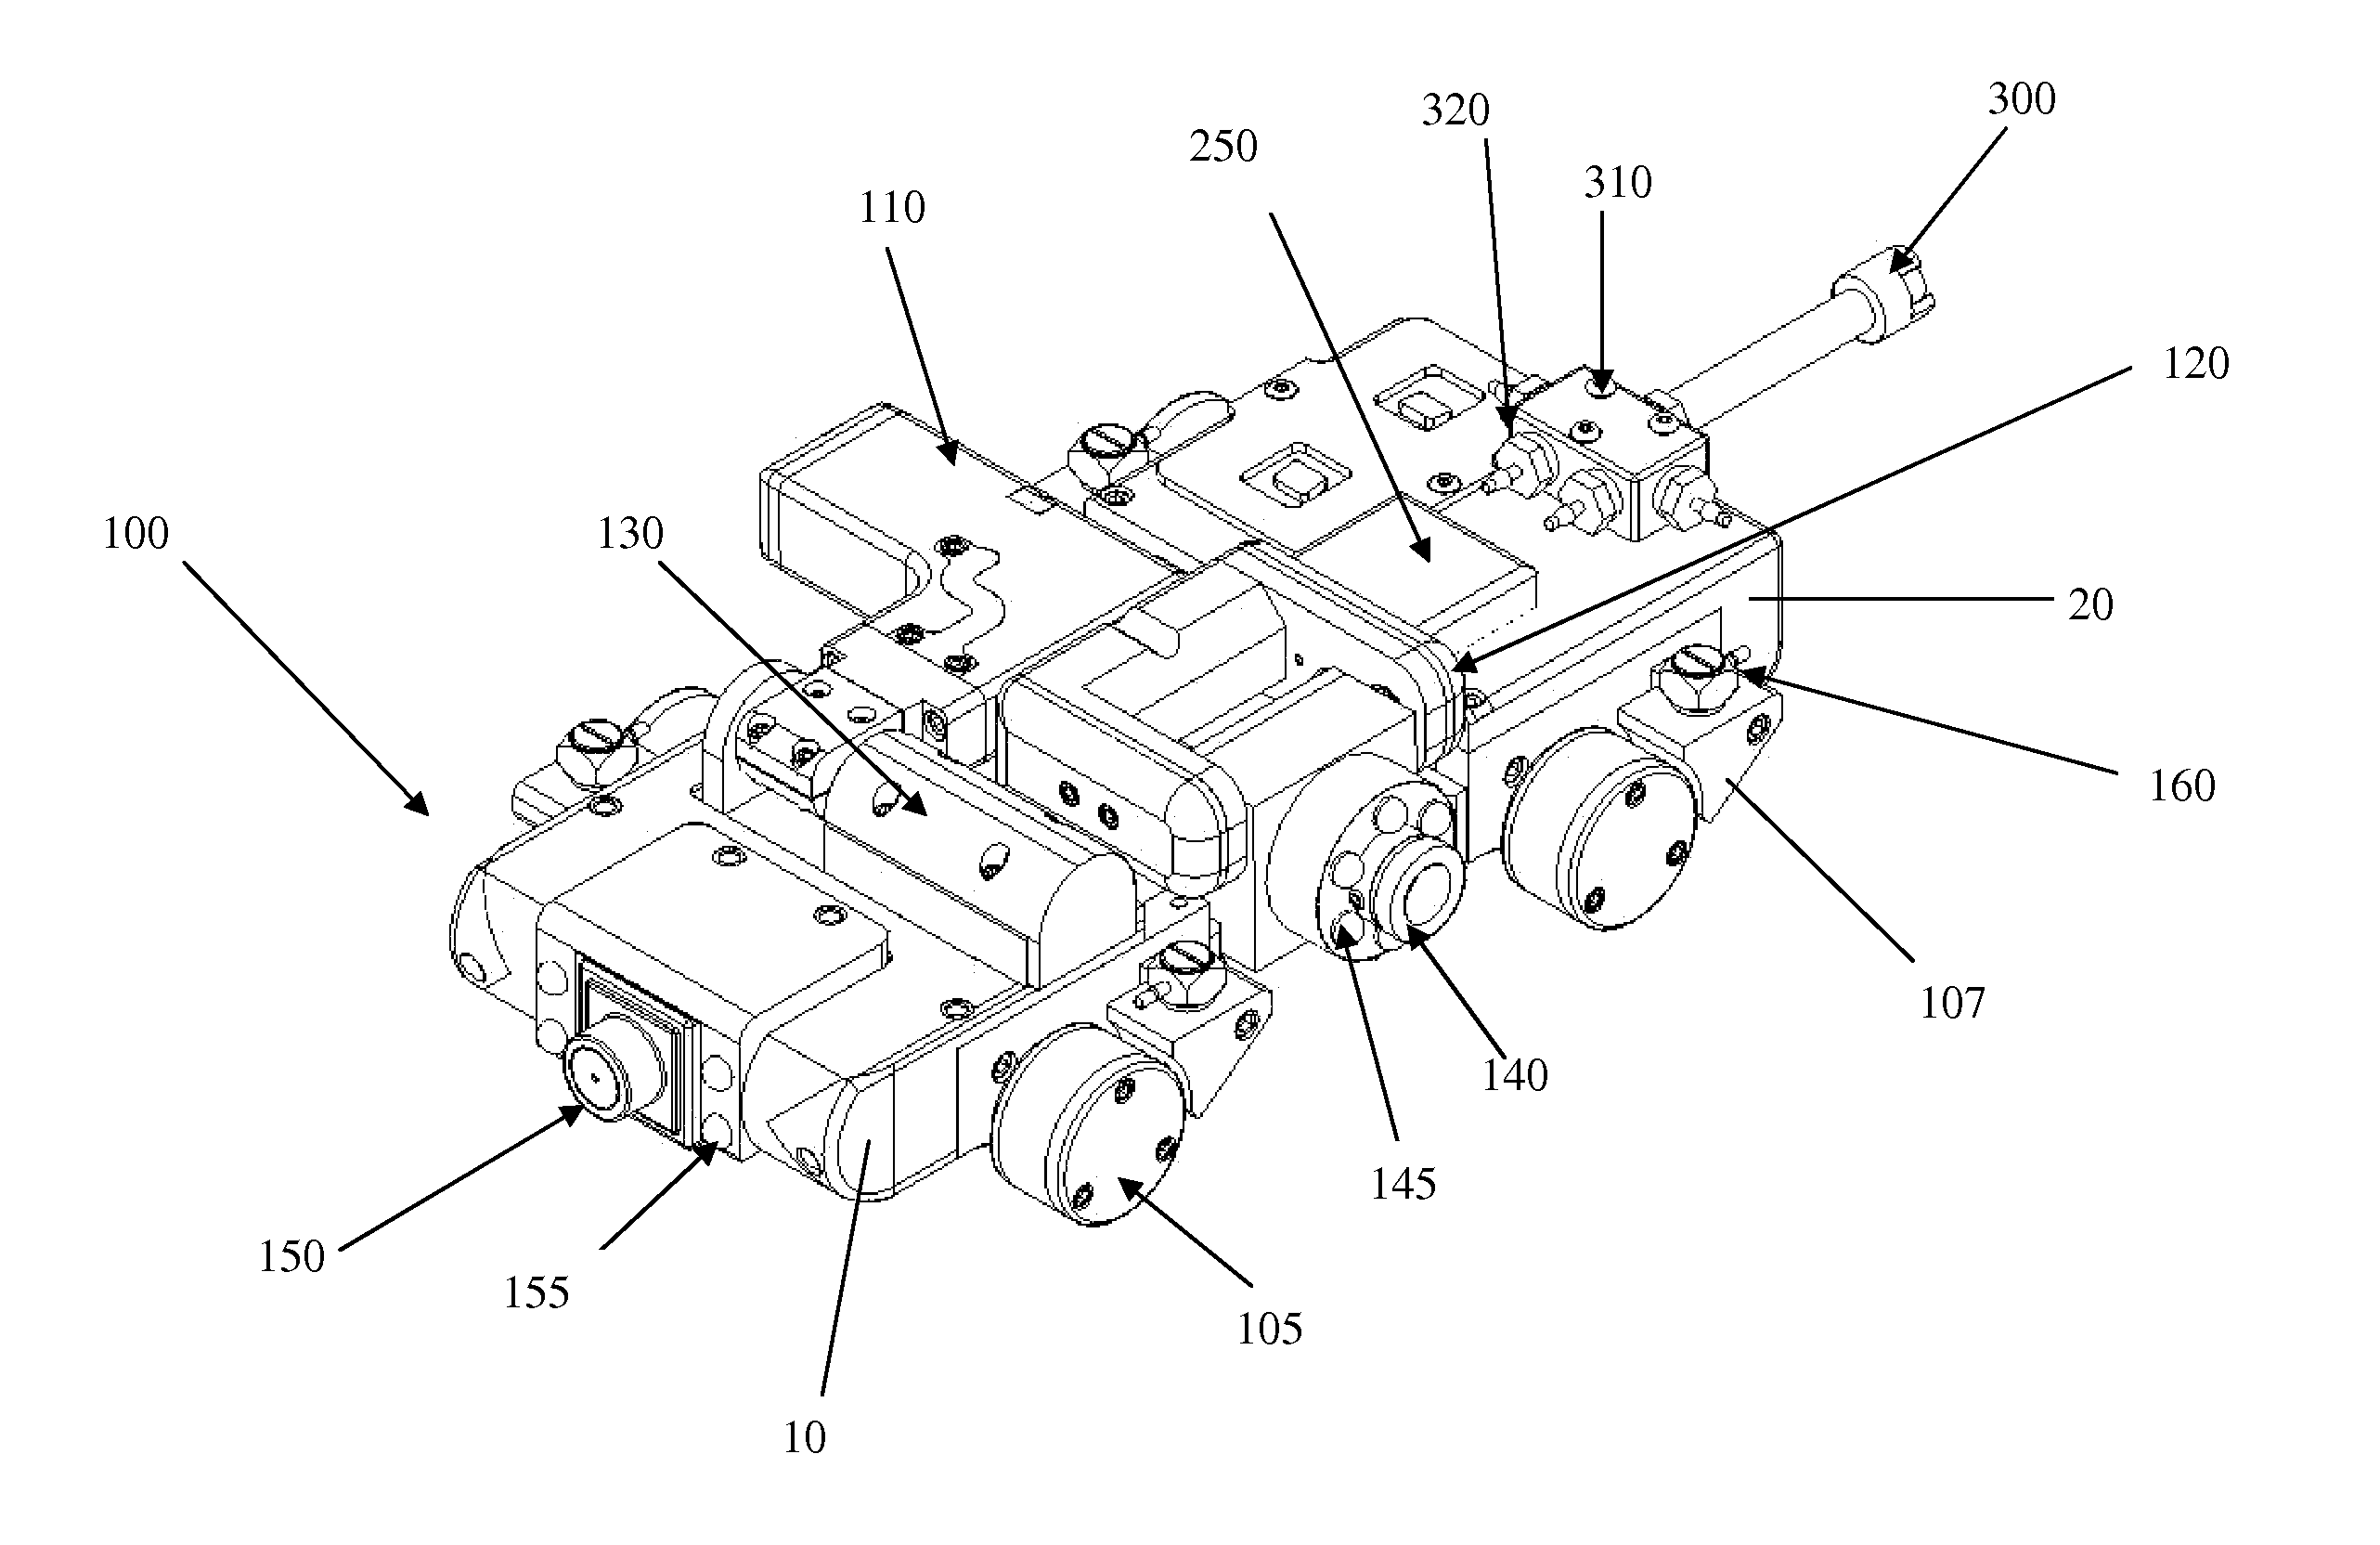 Inspection system and inspection process utilizing magnetic inspection vehicle